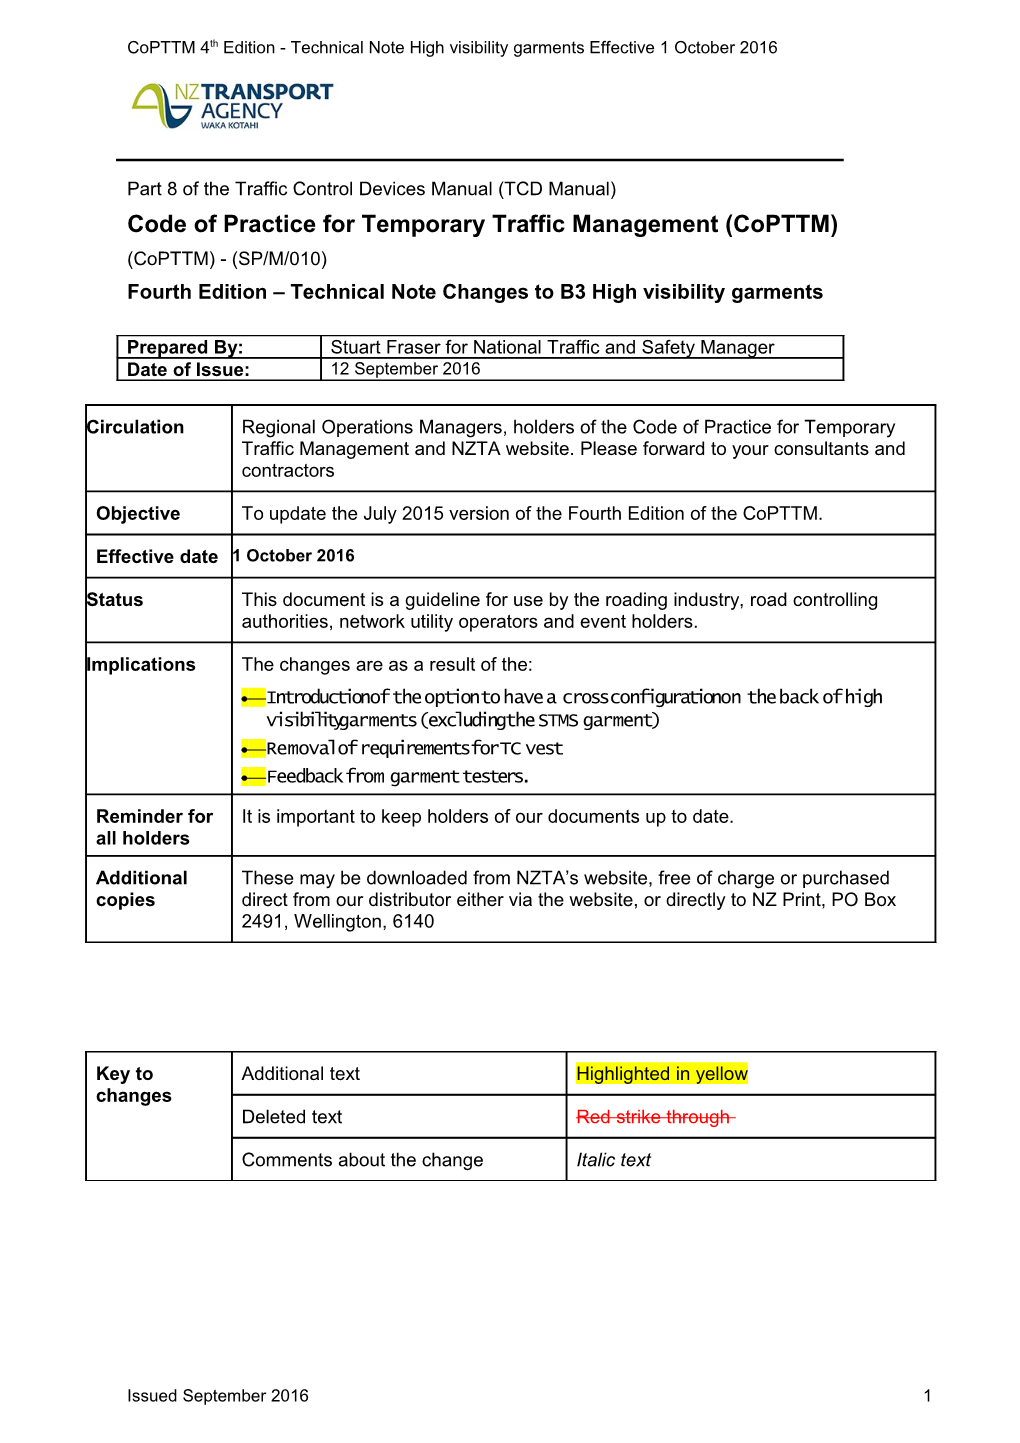 Code of Practice for Temporary Traffic Management (Copttm)